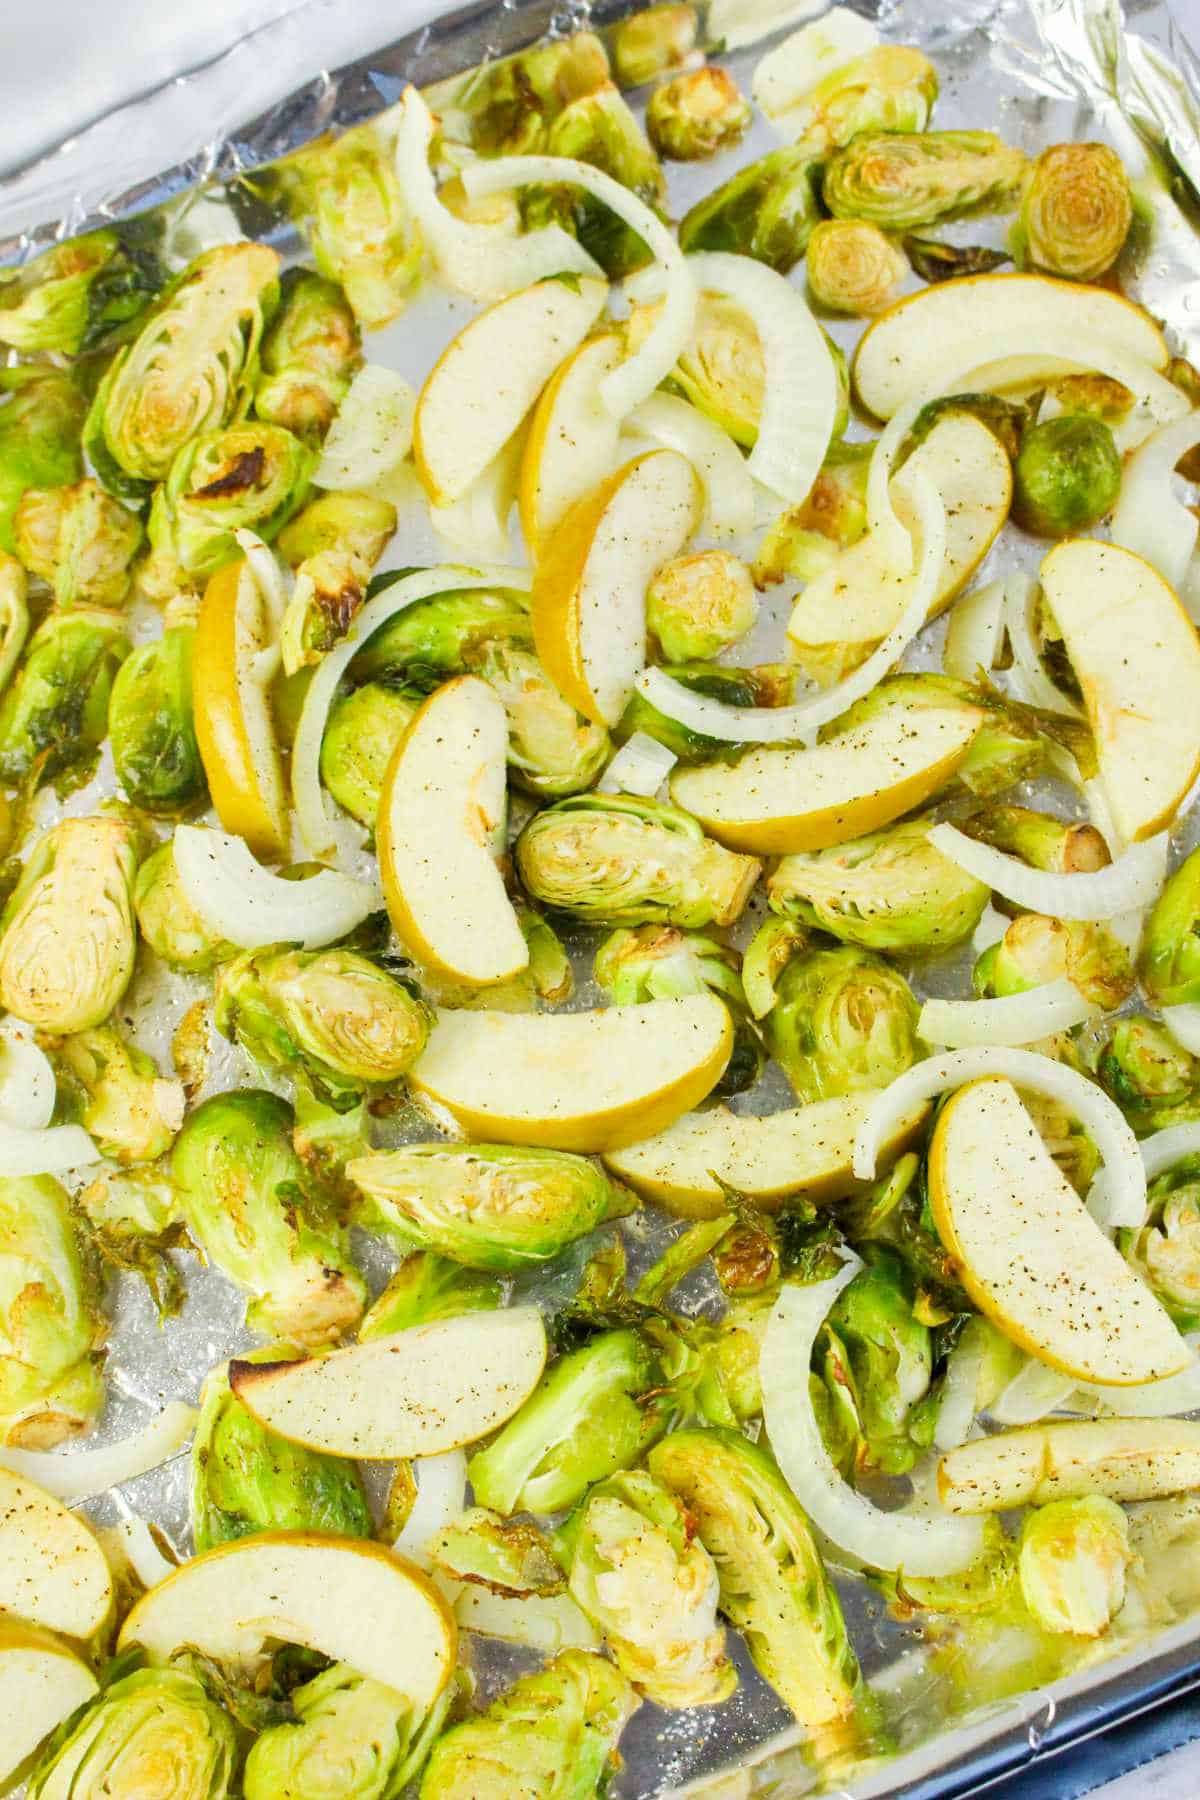 sheet pan with roasted brussel sprouts and sliced granny smith apples.